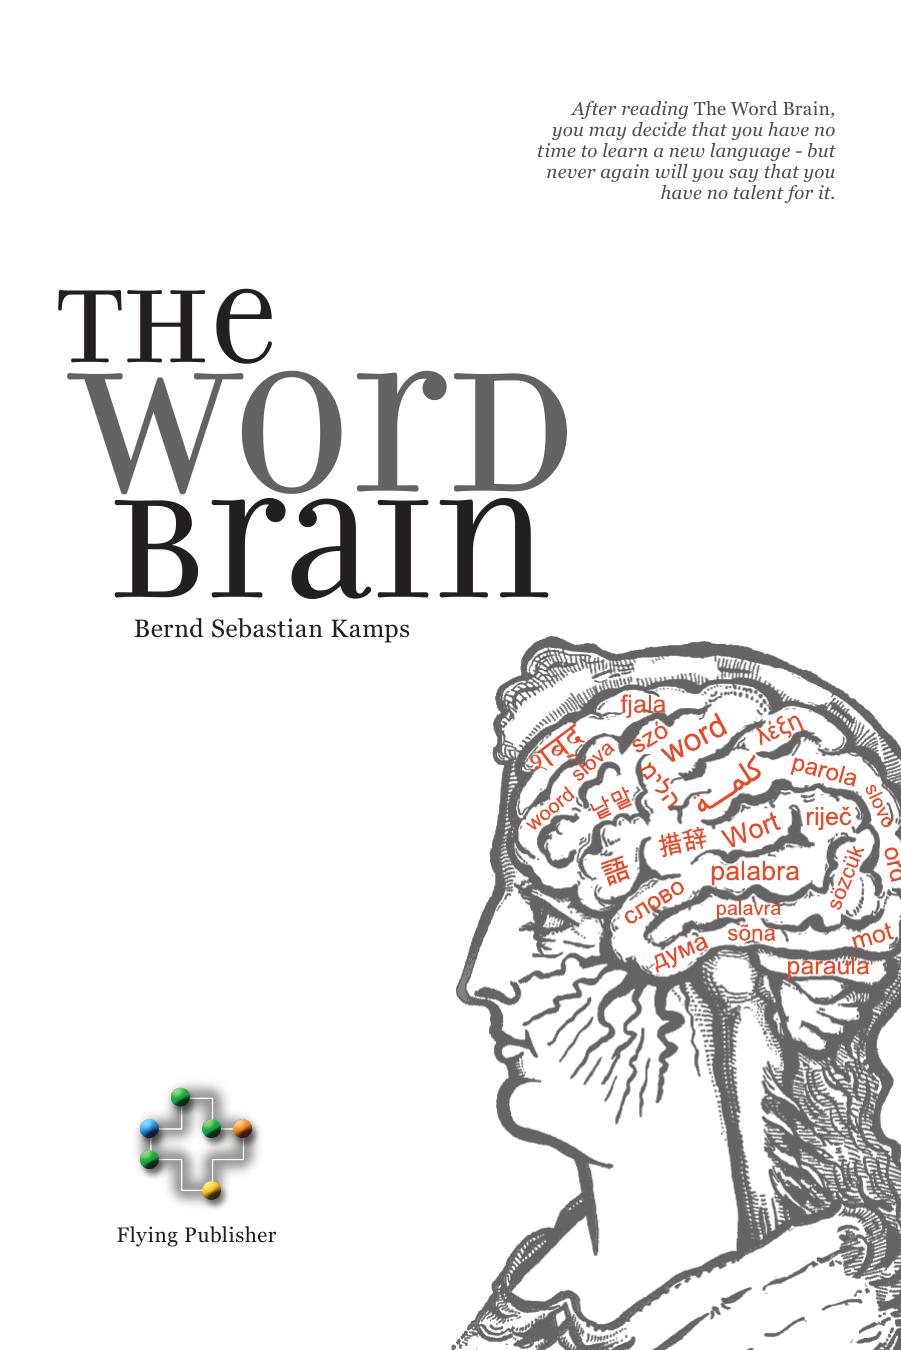 The Word Brain: A Short Guide to Fast Language Learning by Bernd Sebastian Kamps